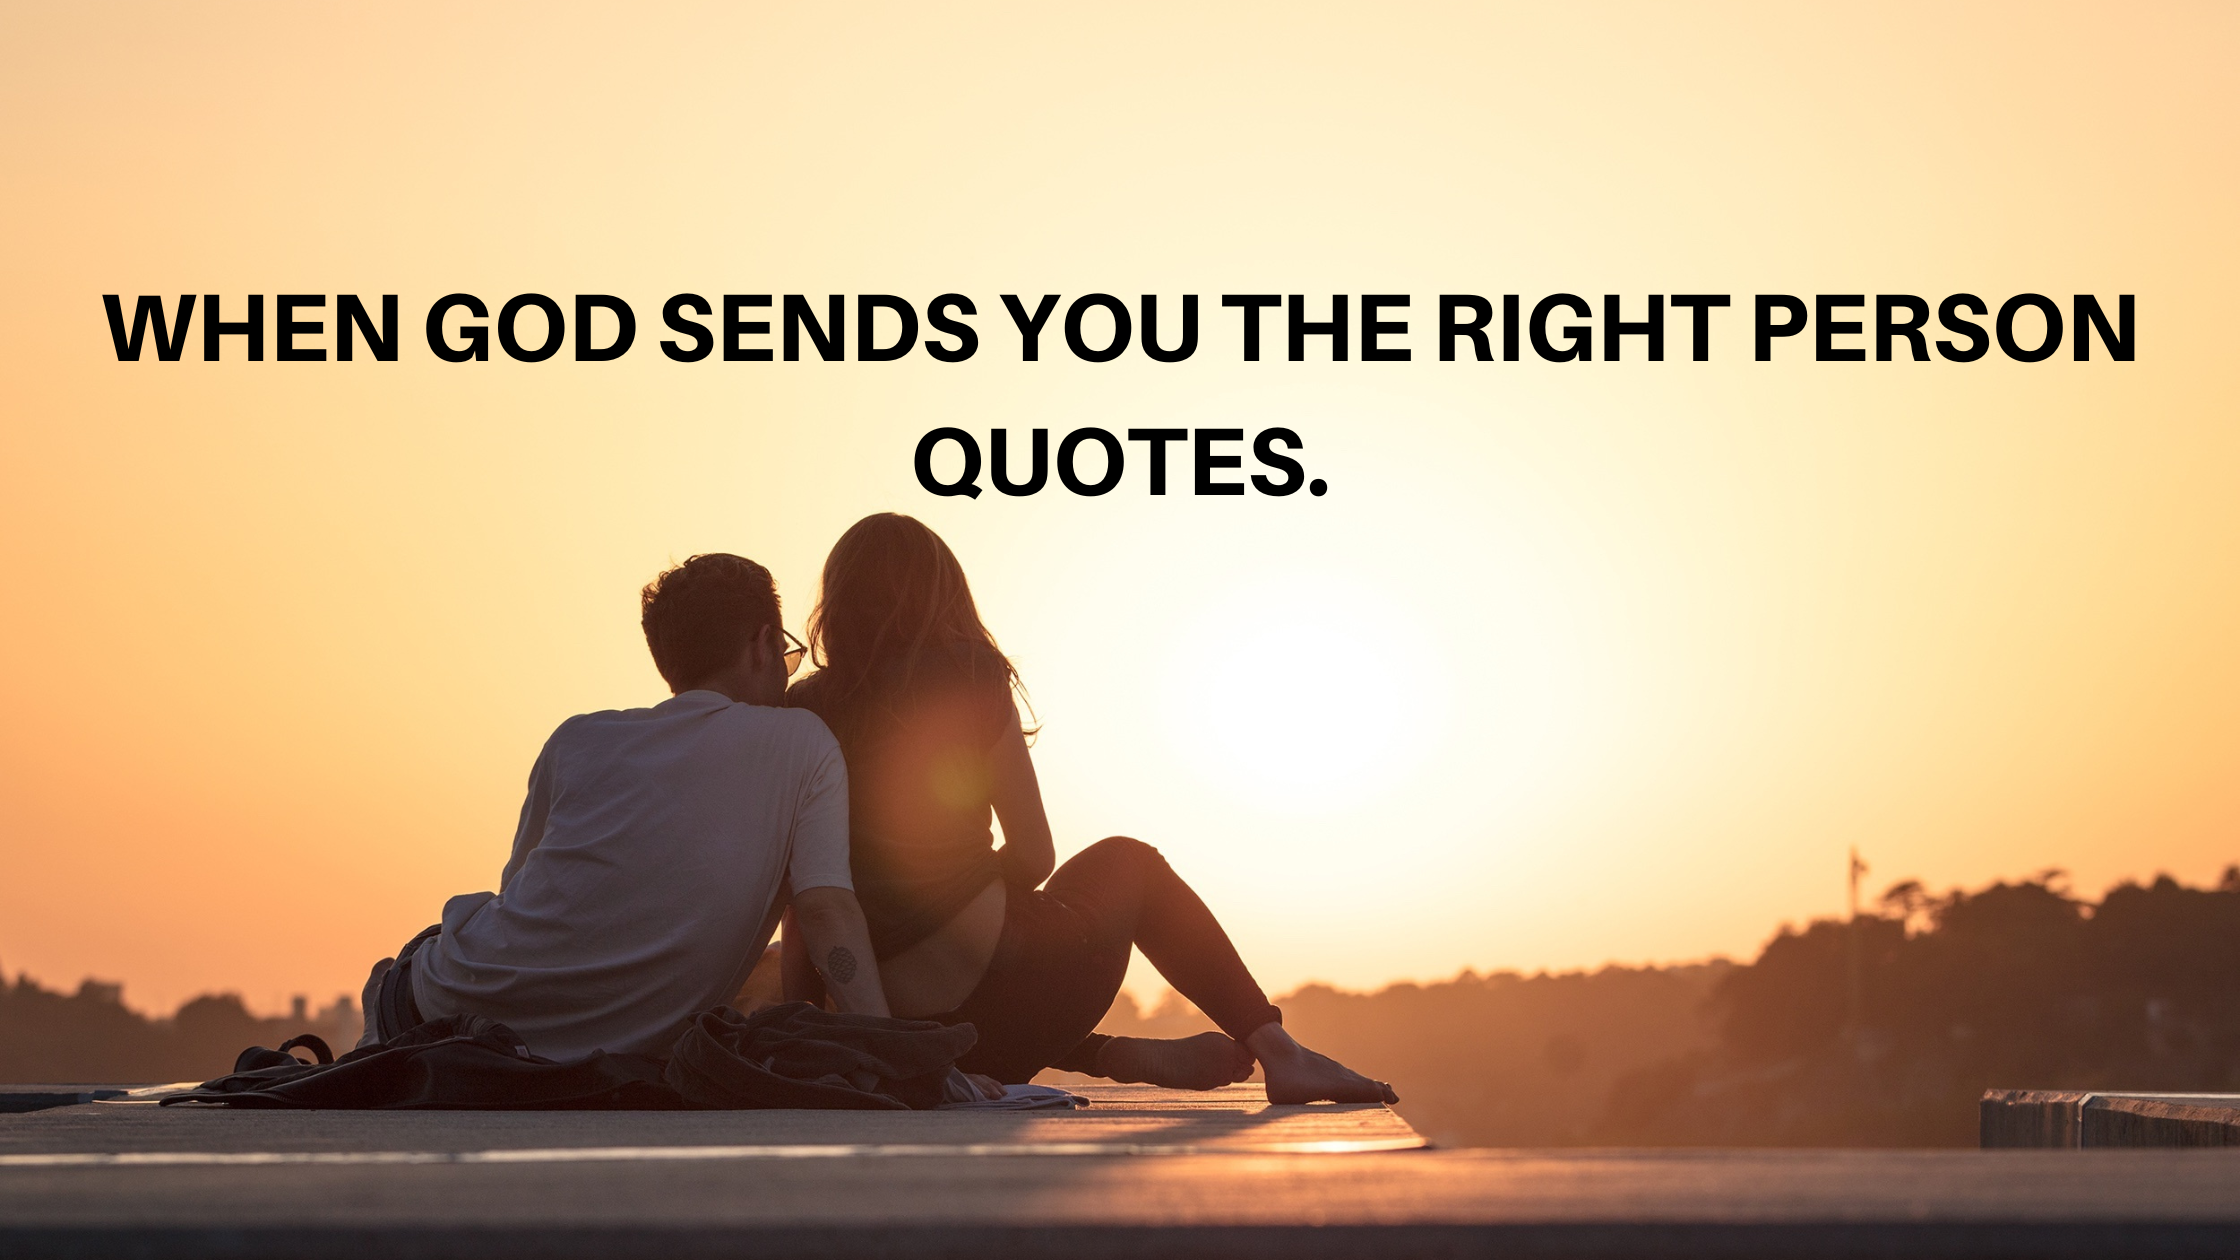 When God Sends You the Right Person Quotes